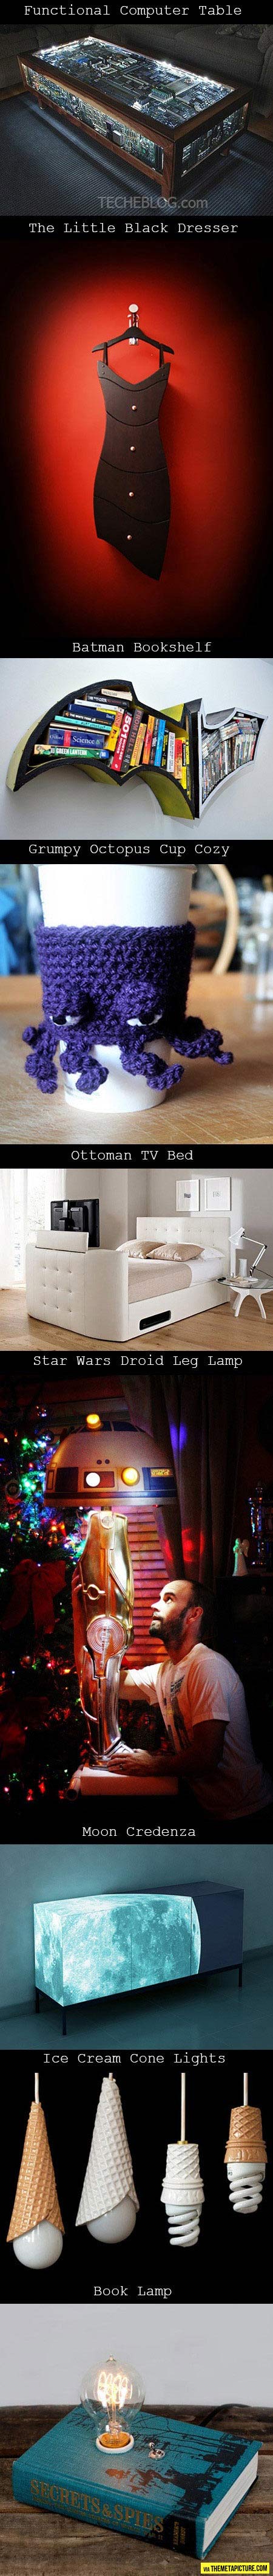 Awesome geek gadgets...